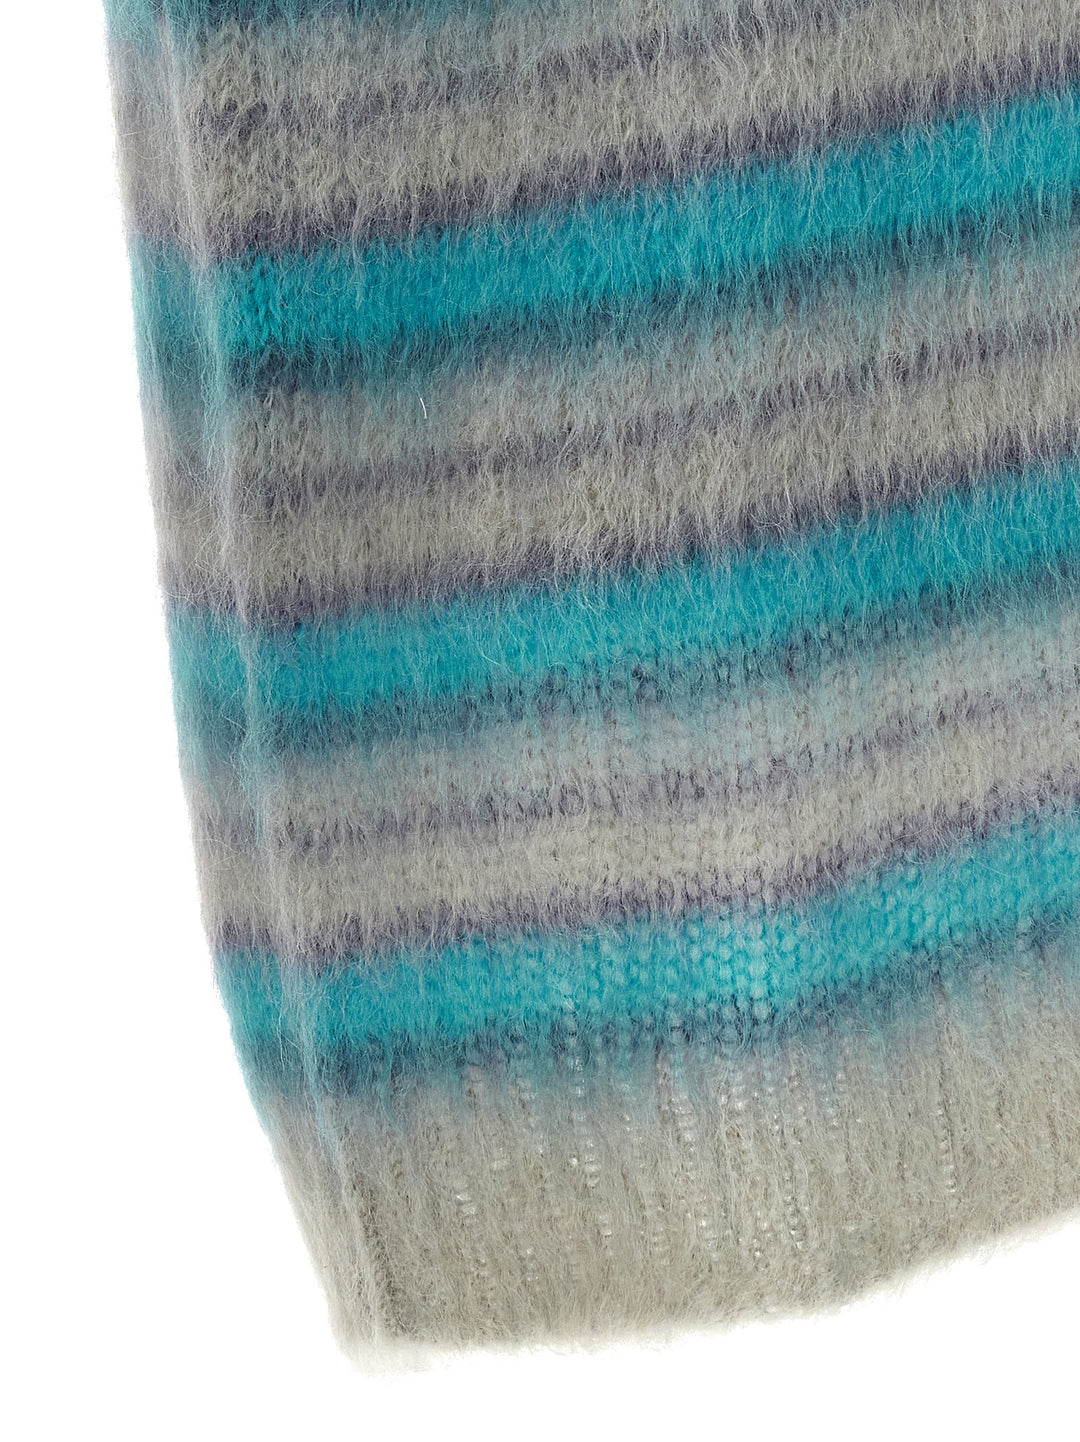 Brushed Stripes Fuzzy Wuzzy Gilet Multicolor